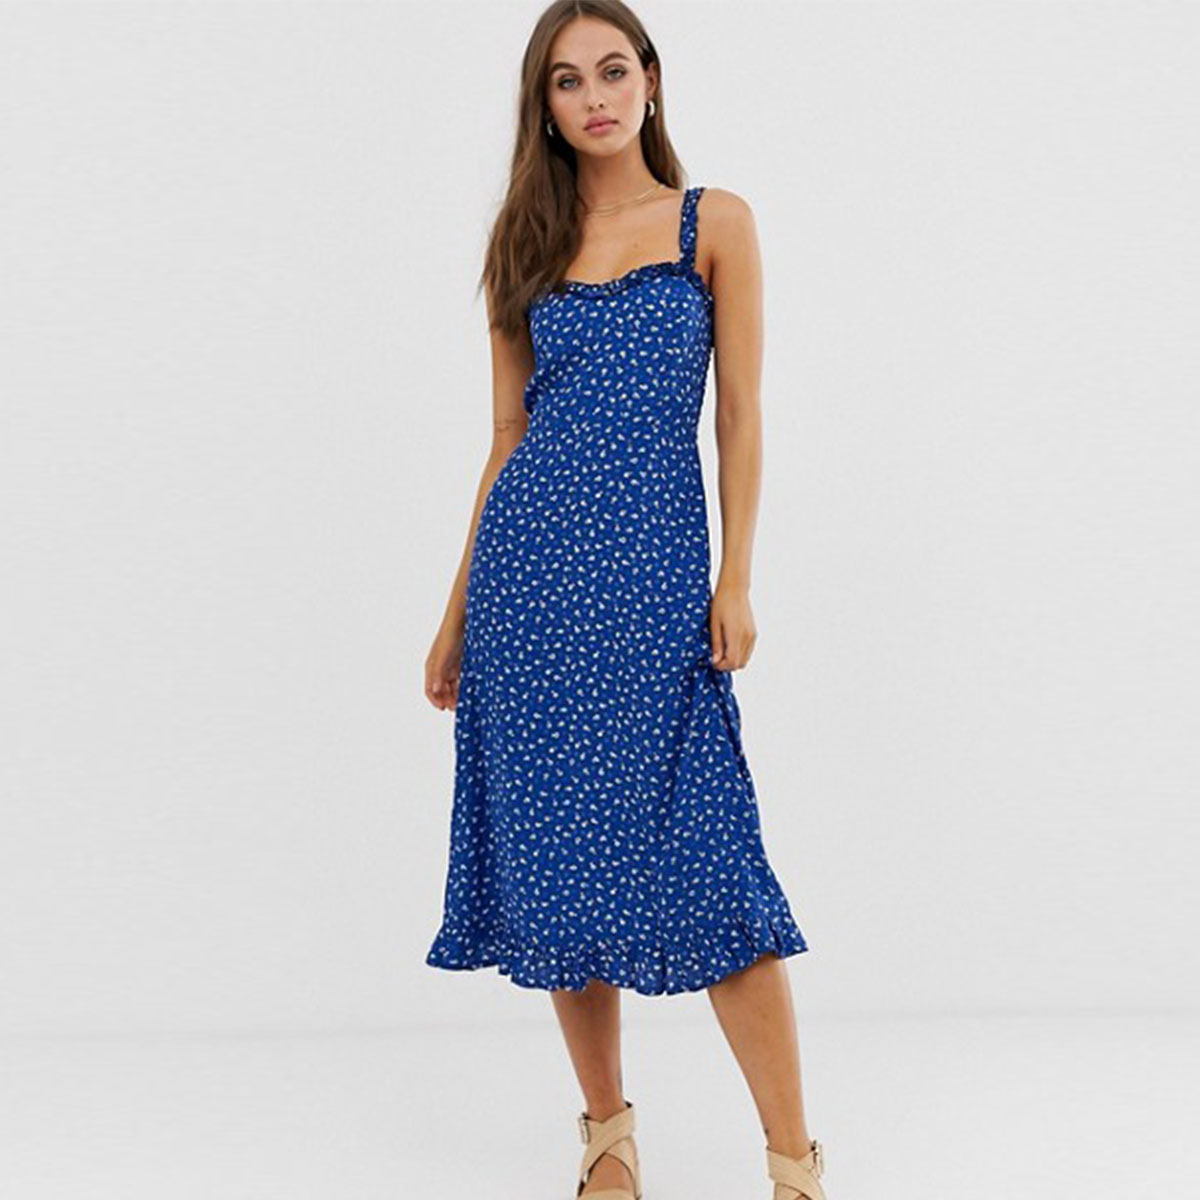 The 29 Best ASOS Wedding Guest Dresses to Buy in 2019